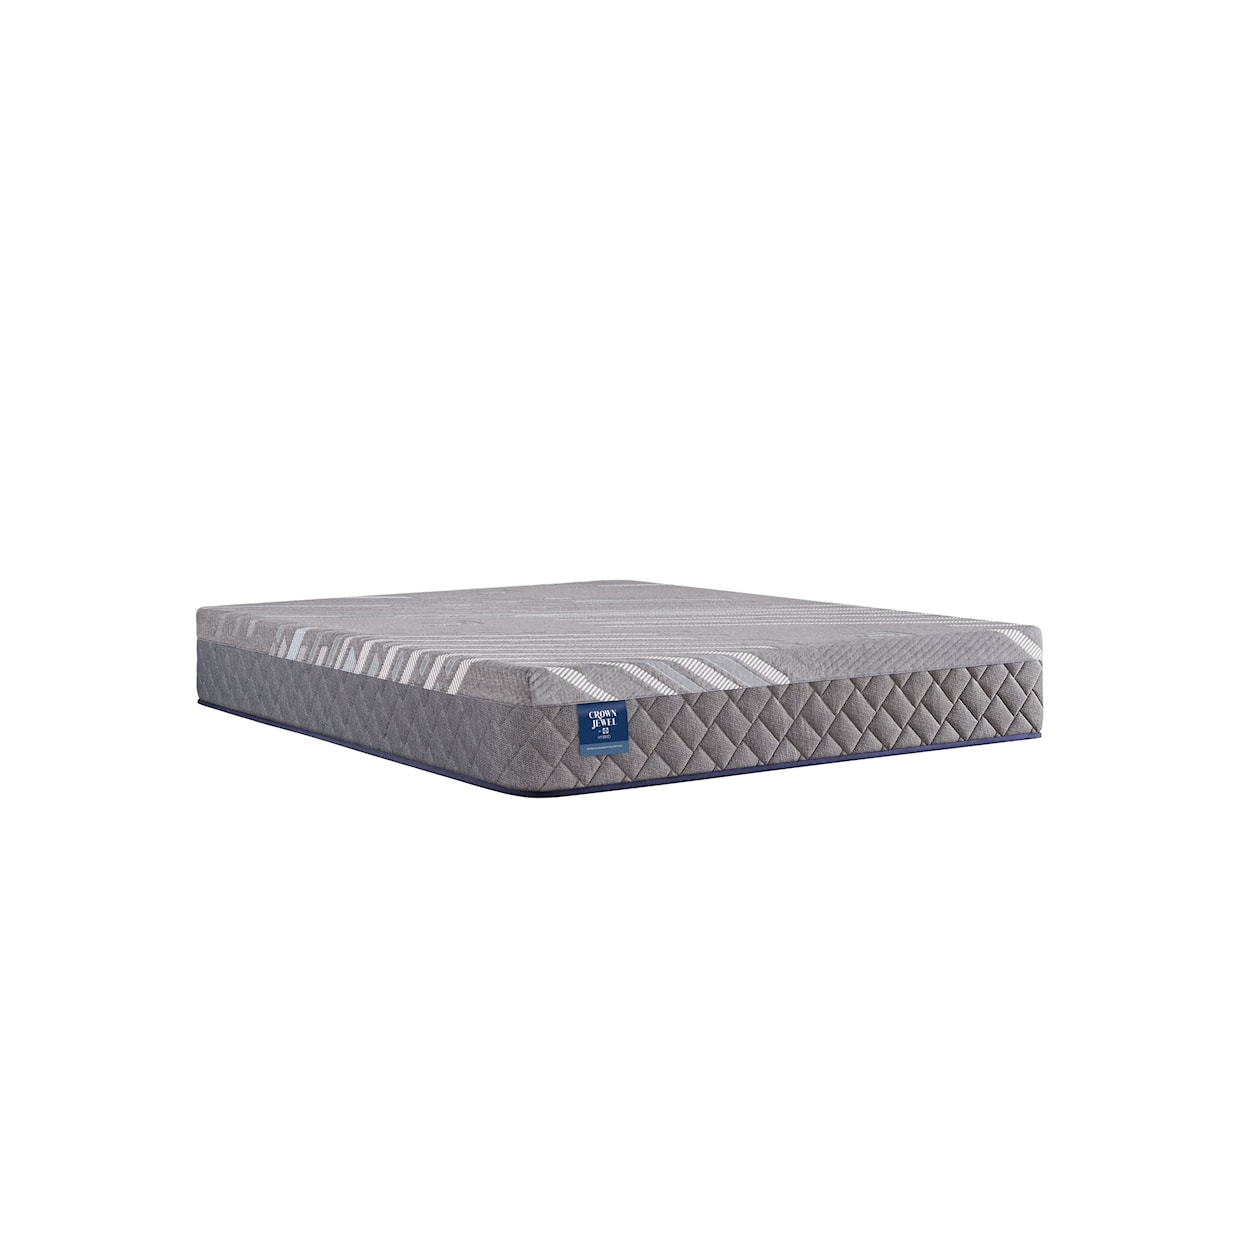 Sealy Crown Jewel H4 Fourth & Park Firm King Mattress